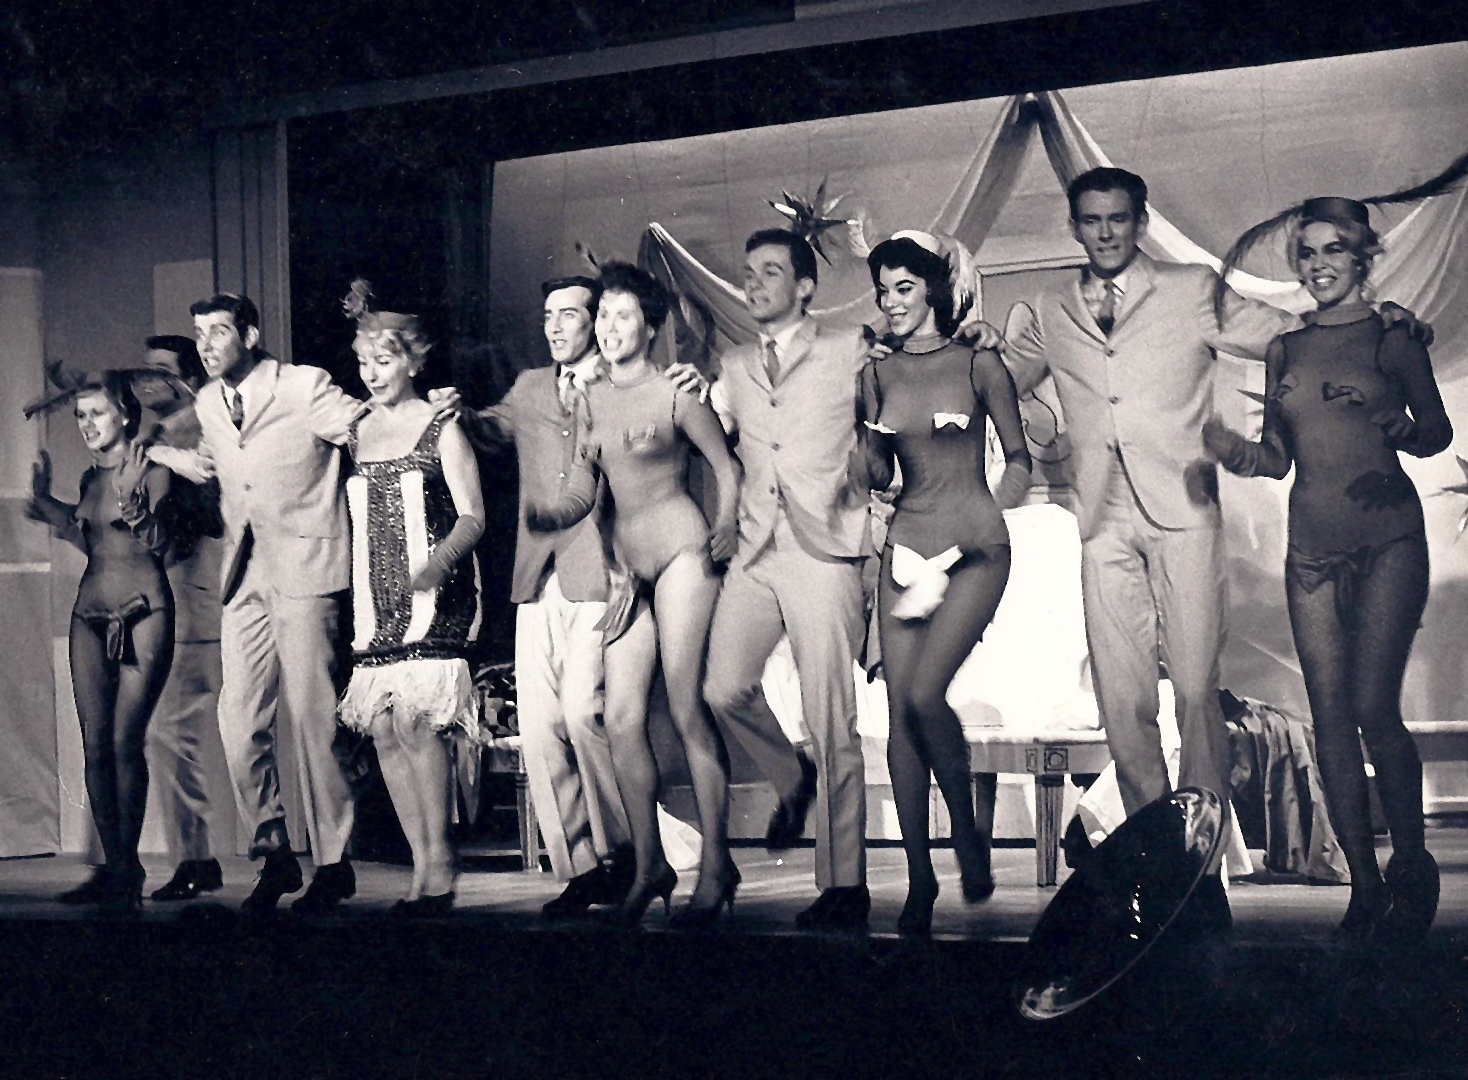 Bonnie (3rd from right) with Michele Lee (5th from right) and the Hollywood cast of 